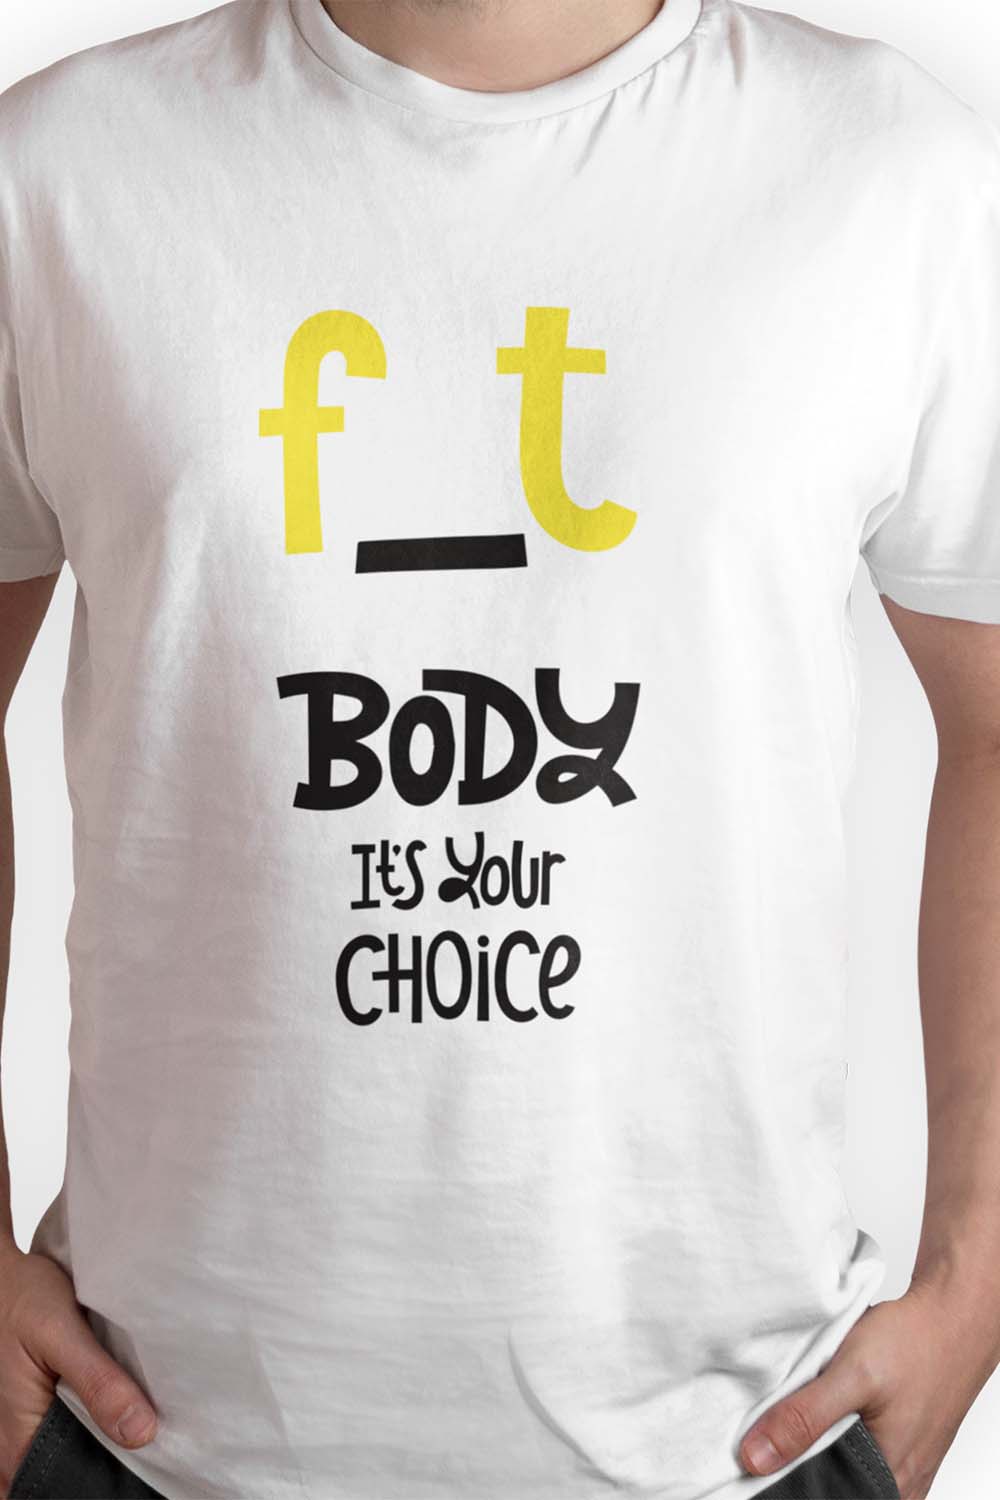 Bundle of 156 T-shirt Designs with Fitness Quotes pinterest image.